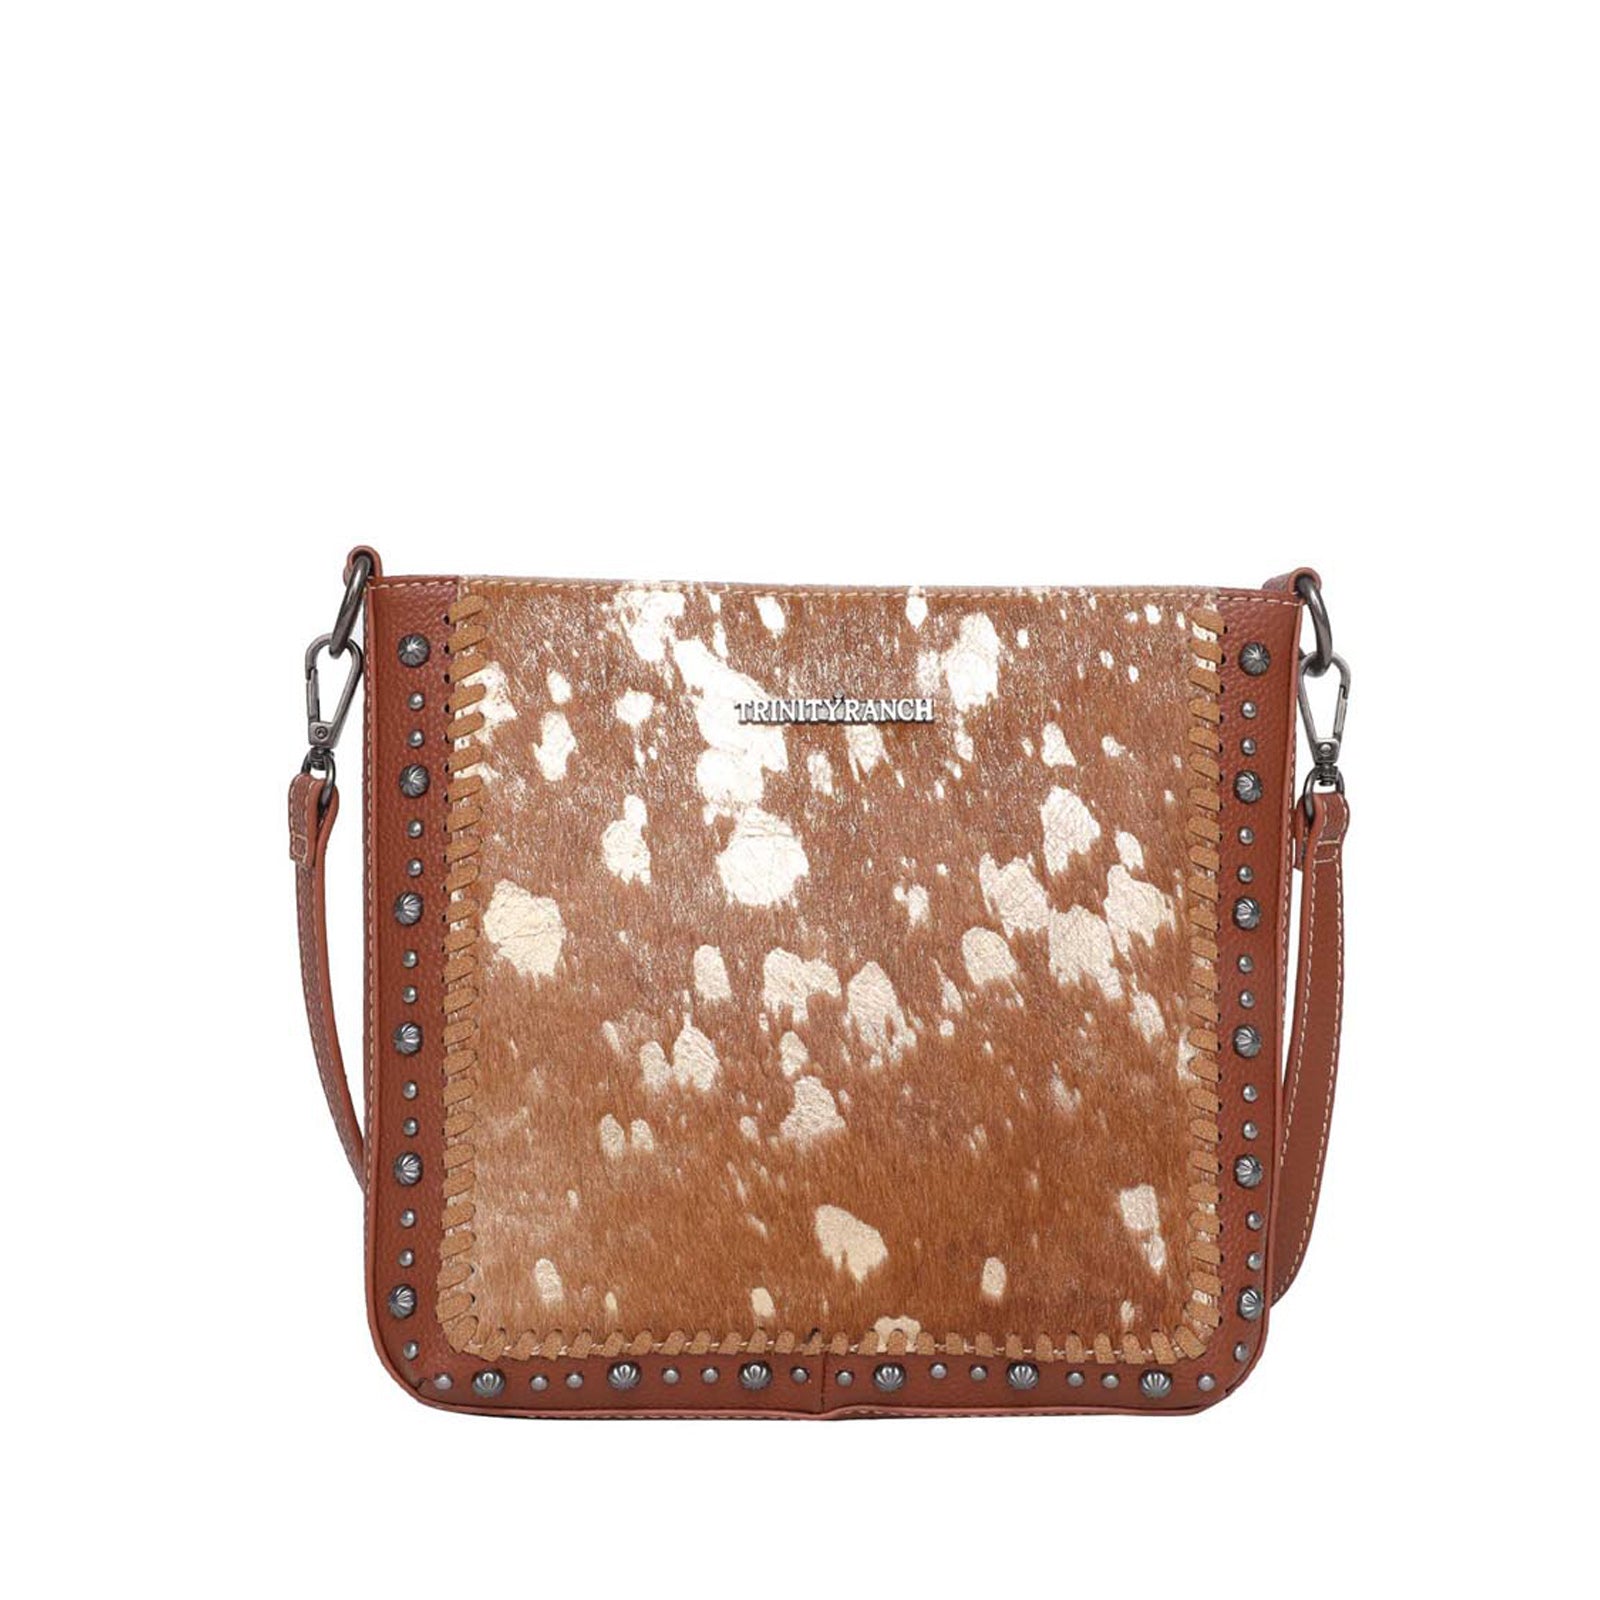 Trinity Ranch Hair-On Cowhide Collection Concealed Carry Crossbody Bag - Cowgirl Wear